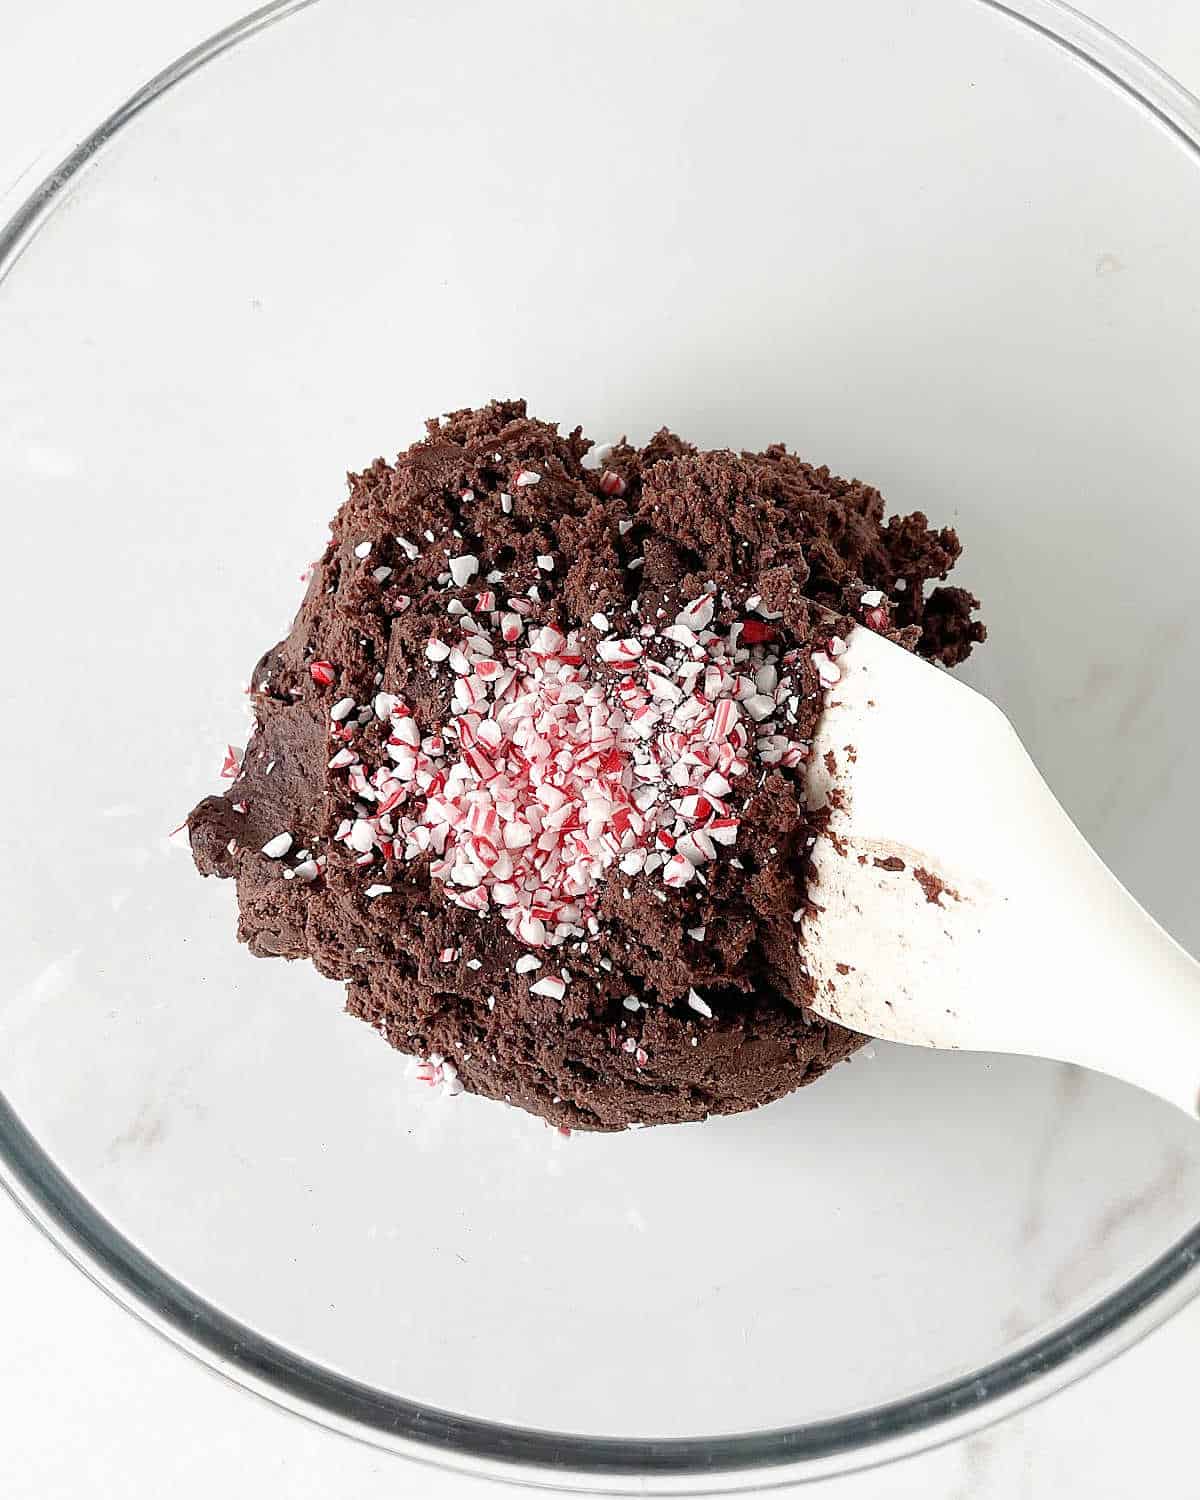 Crushed peppermint candy added to chocolate cookie dough on a glass bowl with a white spatula. White marble surface.